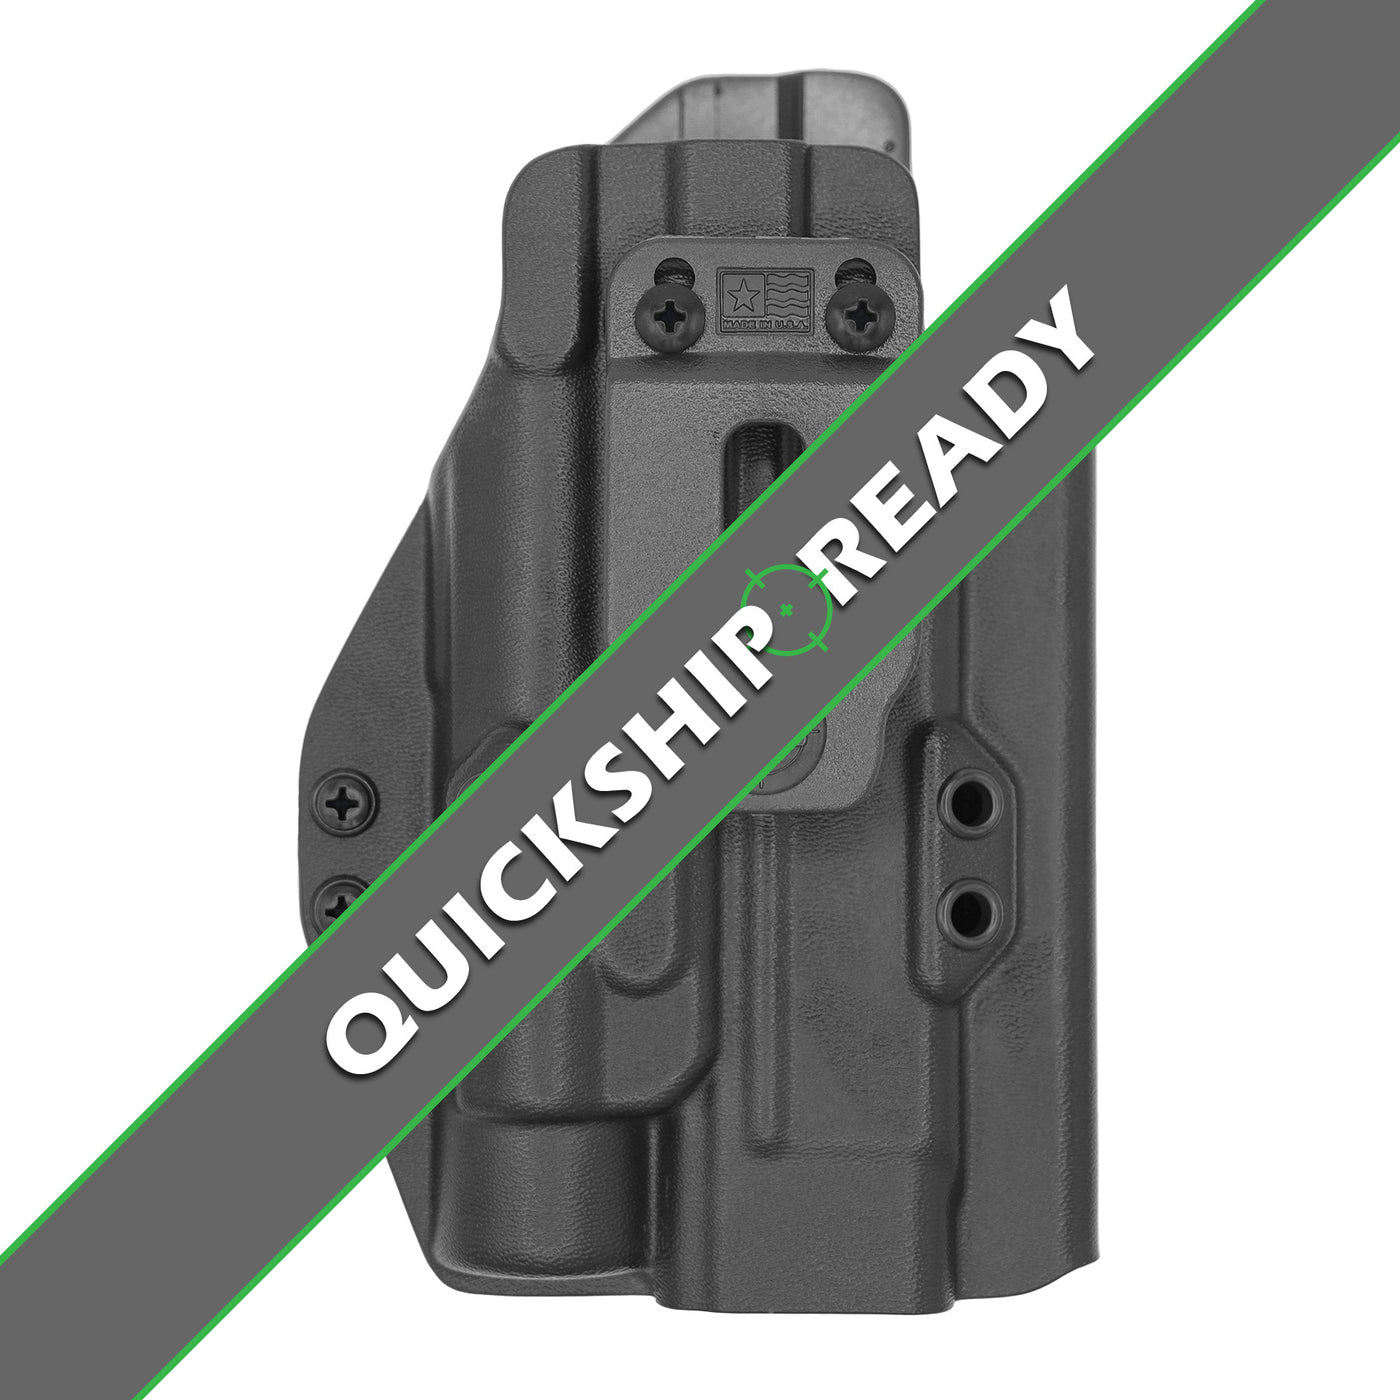 C&G Holsters quickship IWB Tactical CZ P10/c Streamlight TLR-1